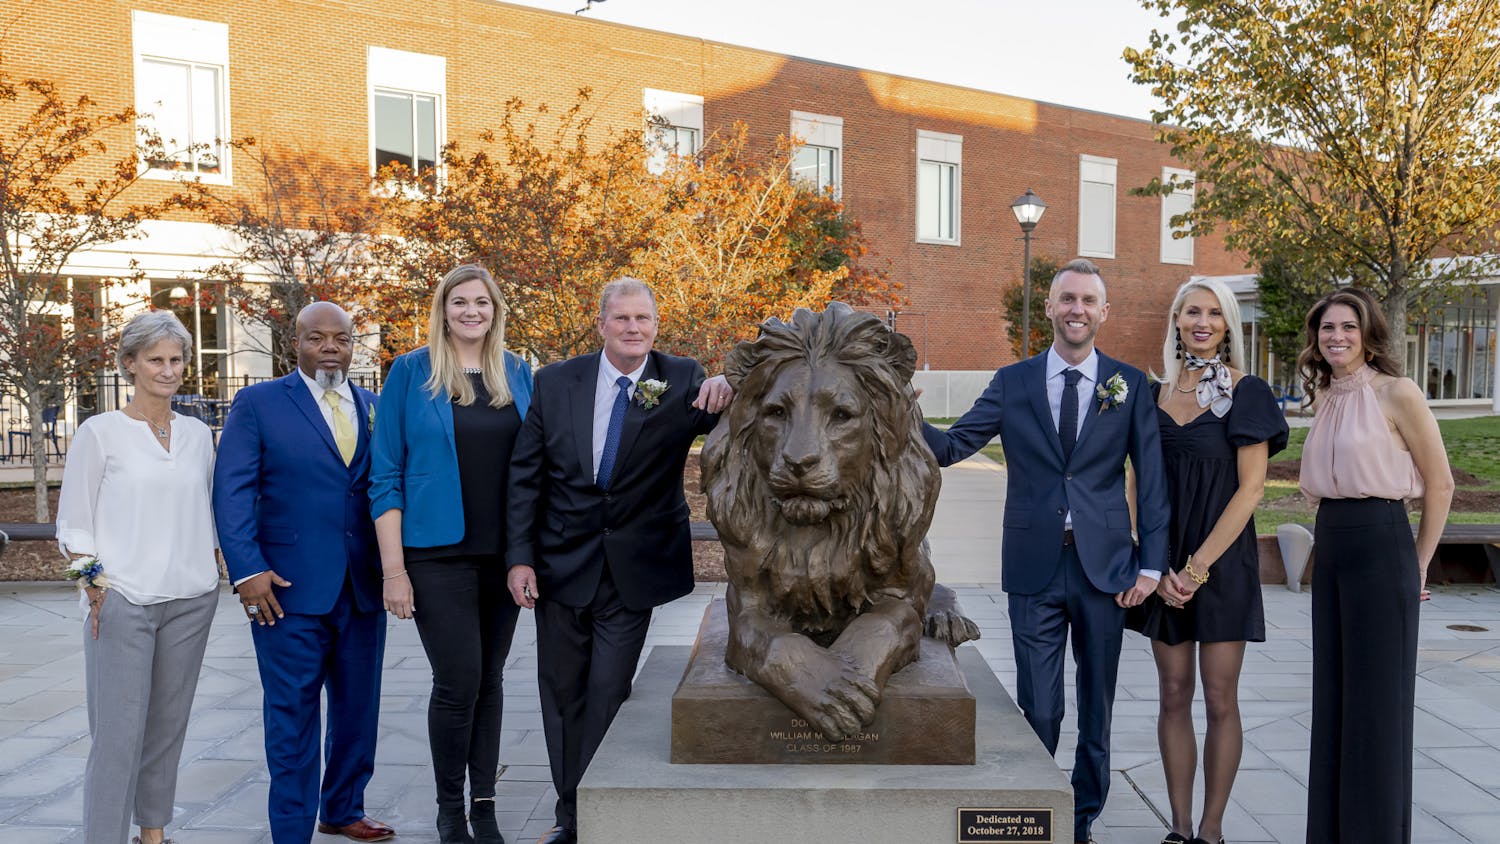 The induction ceremony was held in the Brower Student Center where eight former athletes were honored along with the 1984 wrestling team and the 2000 women’s soccer team(Photo courtesy of Rhea Nall).